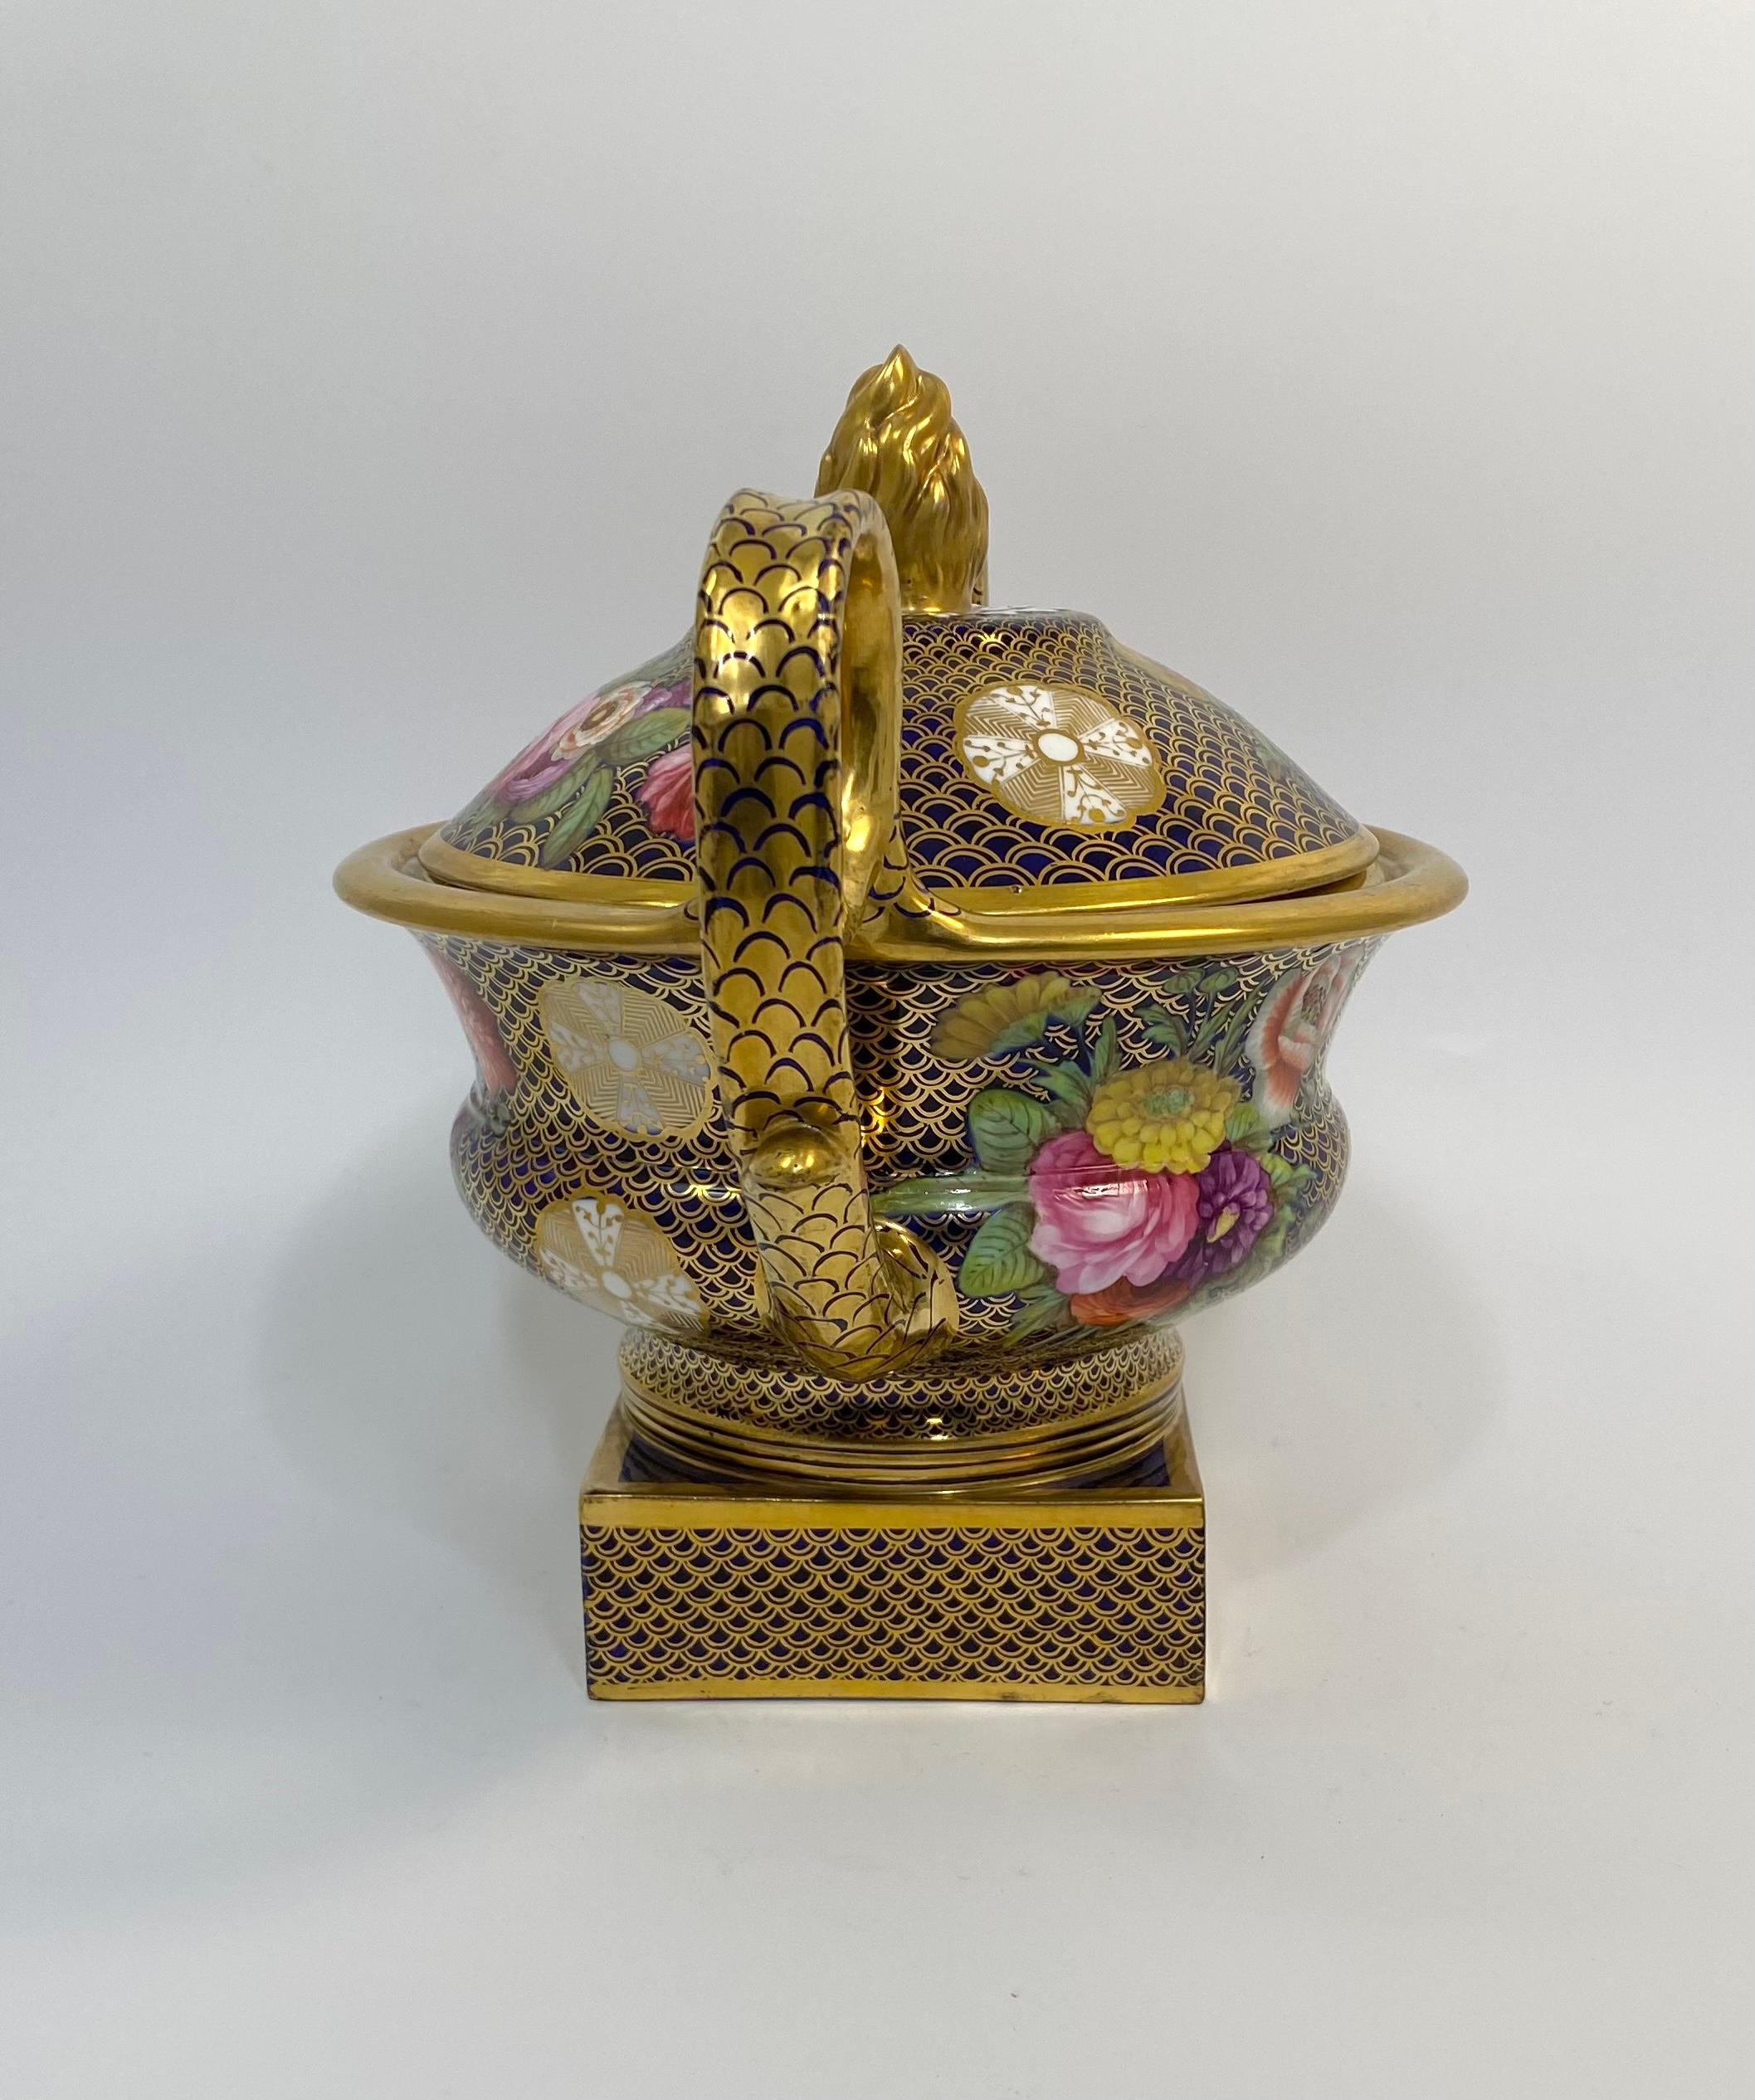 An exceptionally fine and rare Spode porcelain pot pourri, and cover, c. 1820. The ‘Krater’ shaped vase, having large ring handles, and set upon a square pedestal foot. The whole, beautifully hand painted, and gilded in the ‘1166’ pattern, of